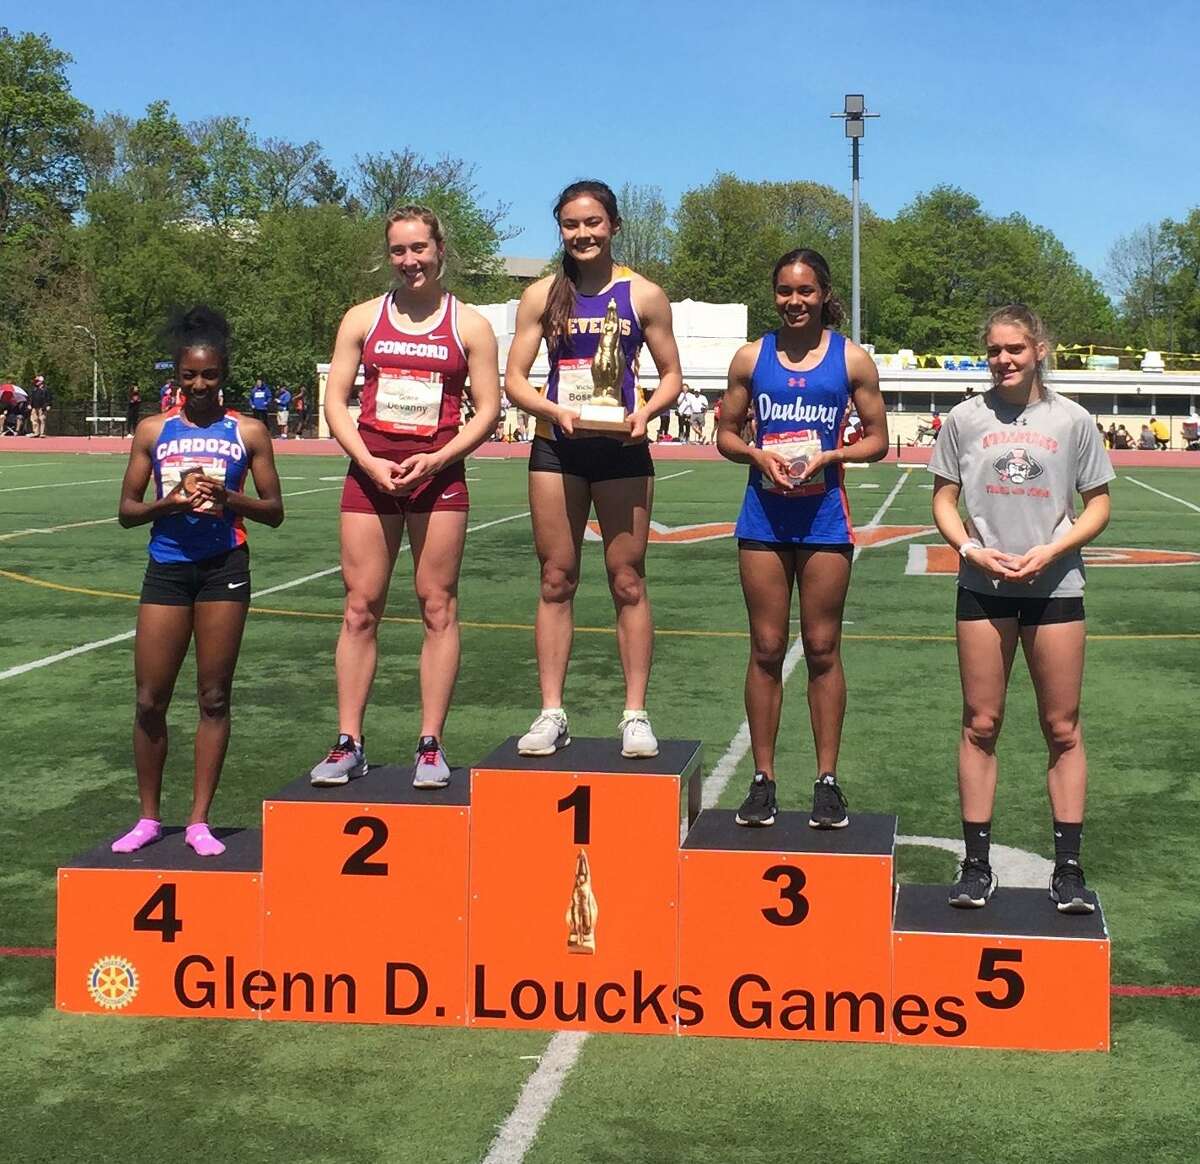 Danbury freshman Alanna Smith took third in the 400 meters at the Loucks Games on Saturday. Her time (55.34) set a school record.